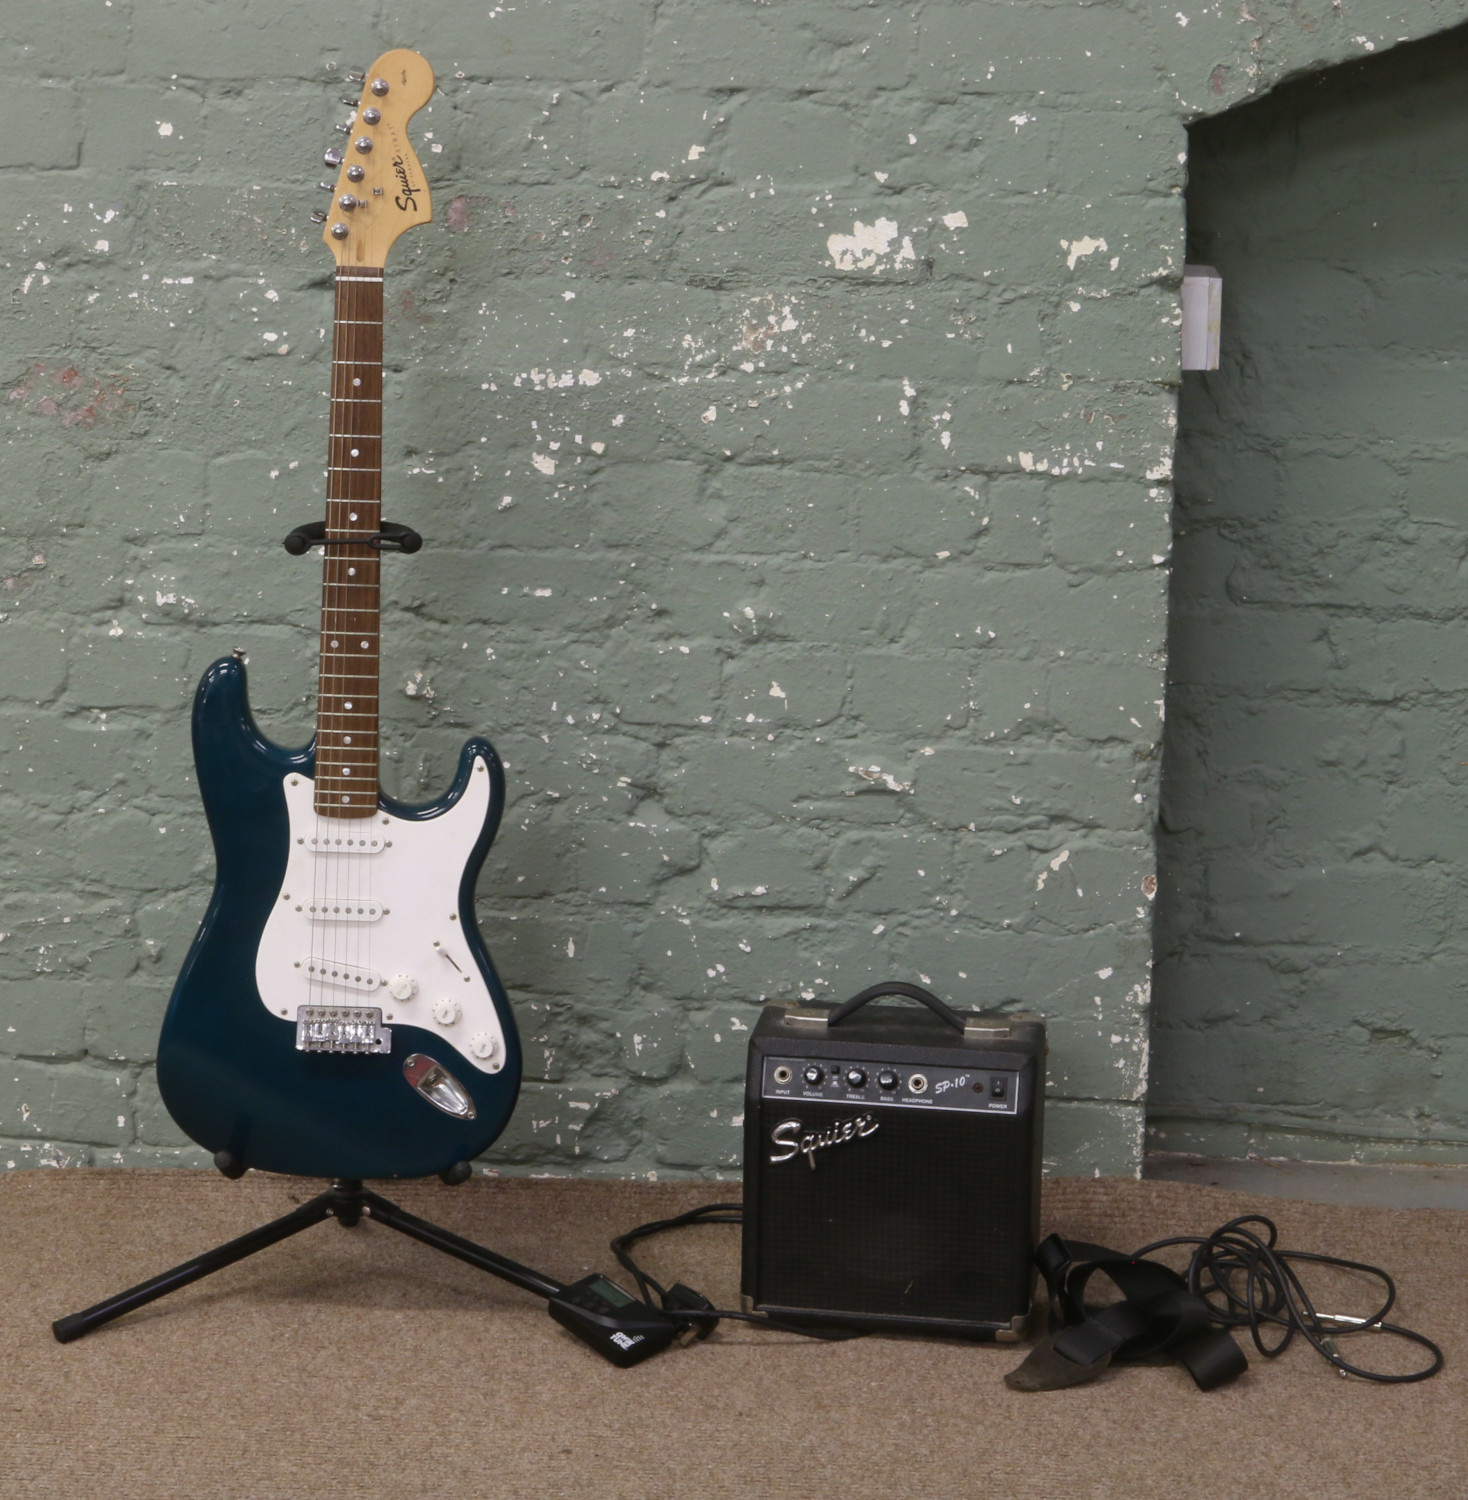 A squire by Fender Stratocaster electric guitar with emerald green body along with a squire SP10